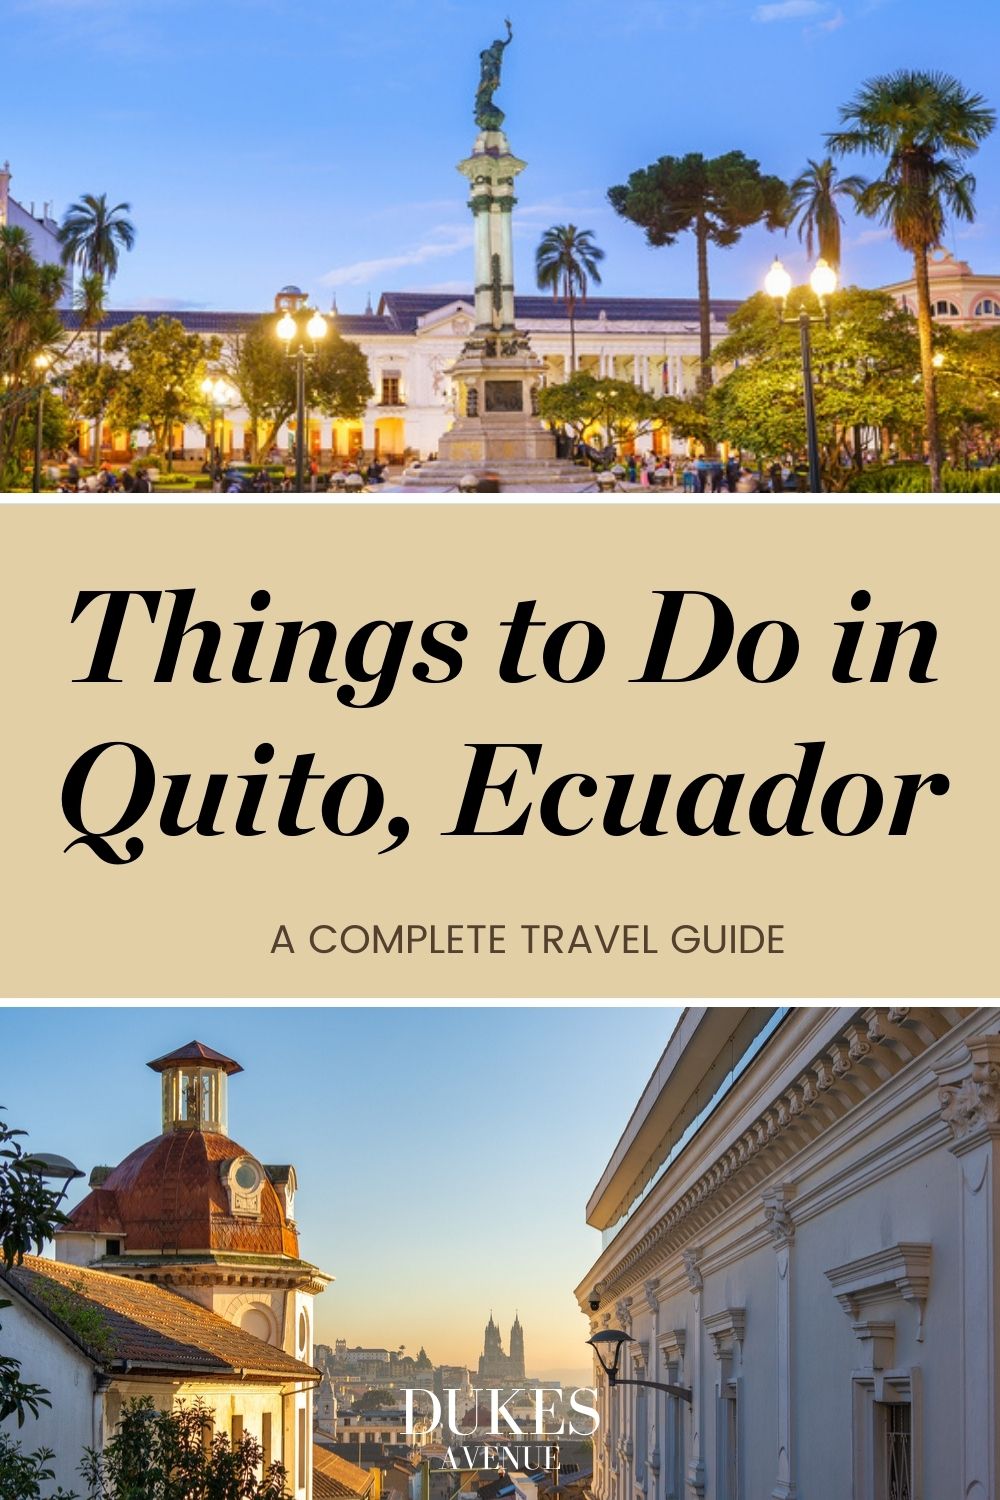 Two images of sites in Quito, Ecuador with text overlay 'Things to Do in Quito, Ecuador'